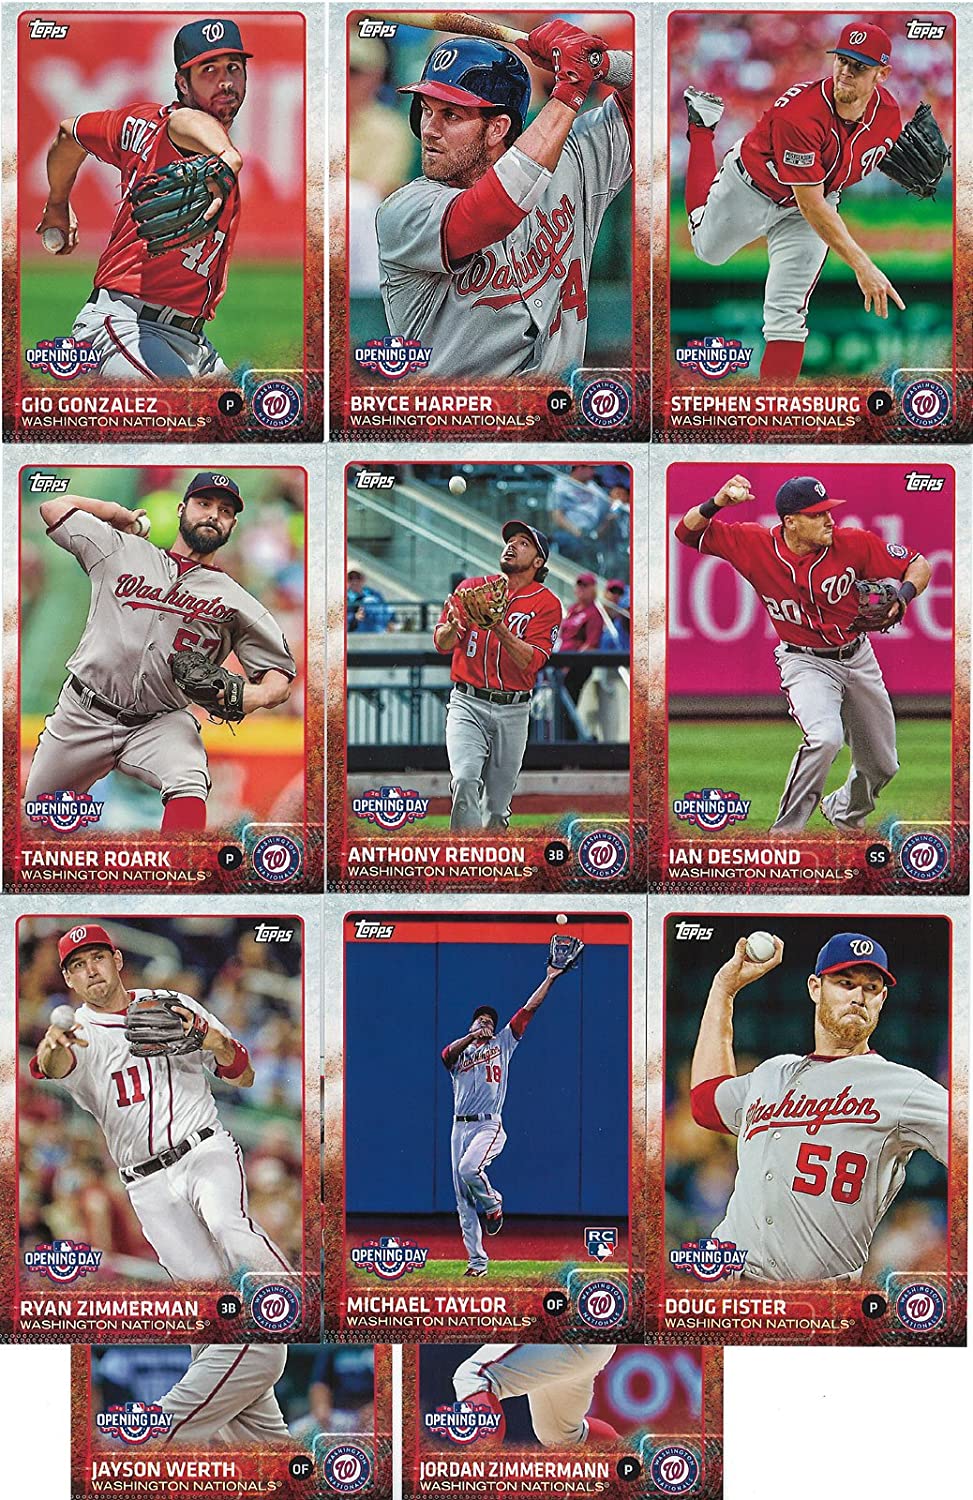 Washington Nationals 2015 Topps OPENING DAY Team Set with Bryce Harper and Stephen Strasburg Plus